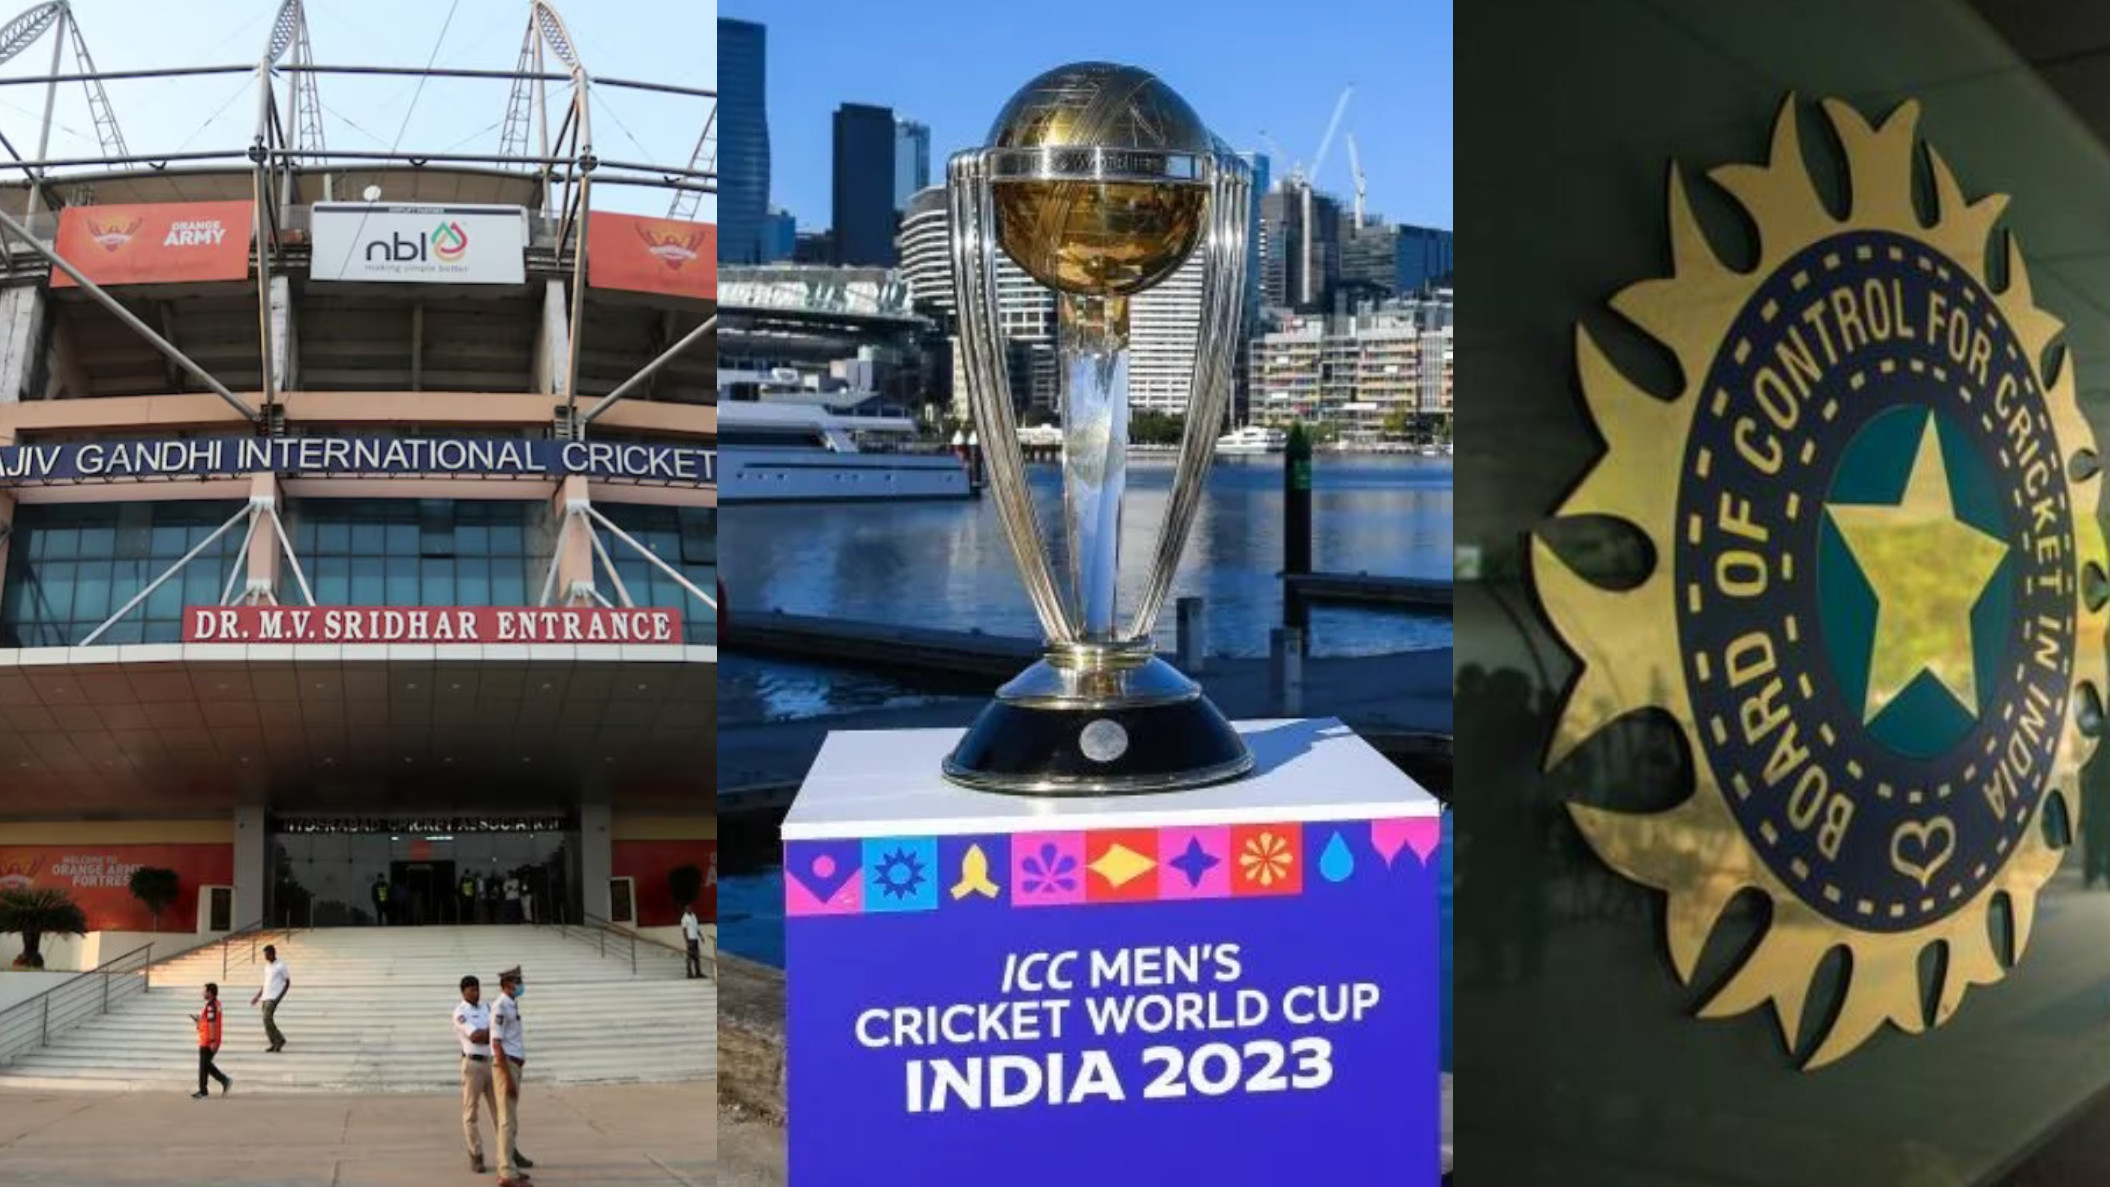 CWC 2023: Hyderabad Cricket Association requests BCCI for tweak in World Cup schedule due to security issues